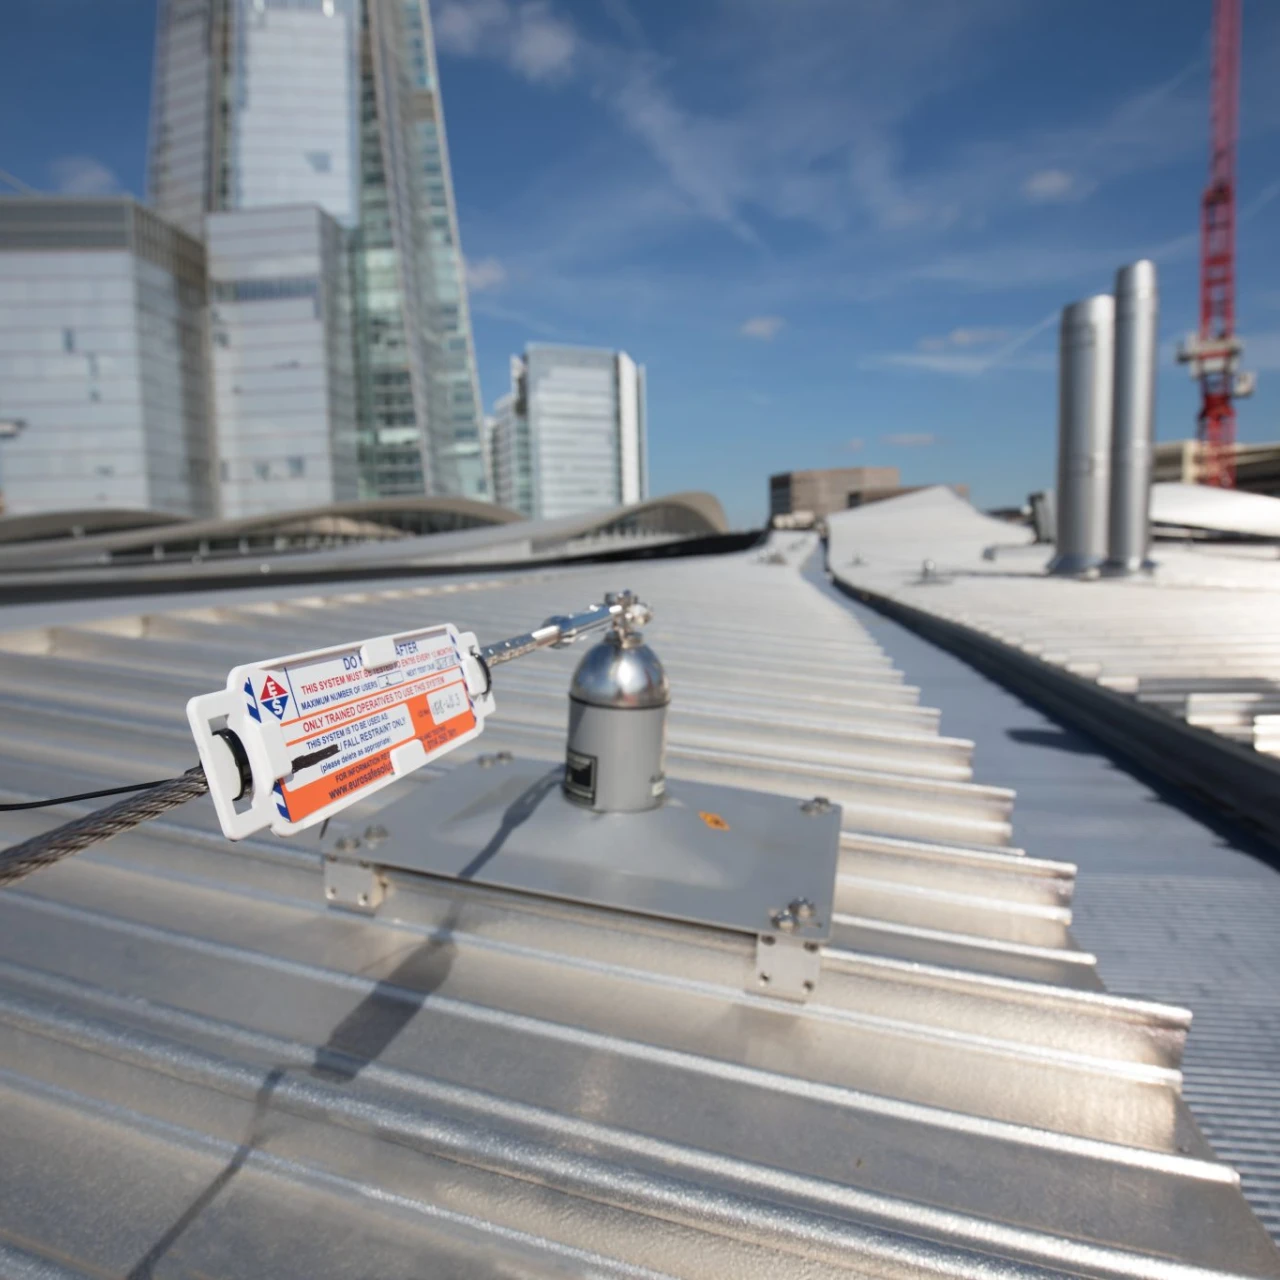 Roof Safety Wire Test & Inspection Hero Image